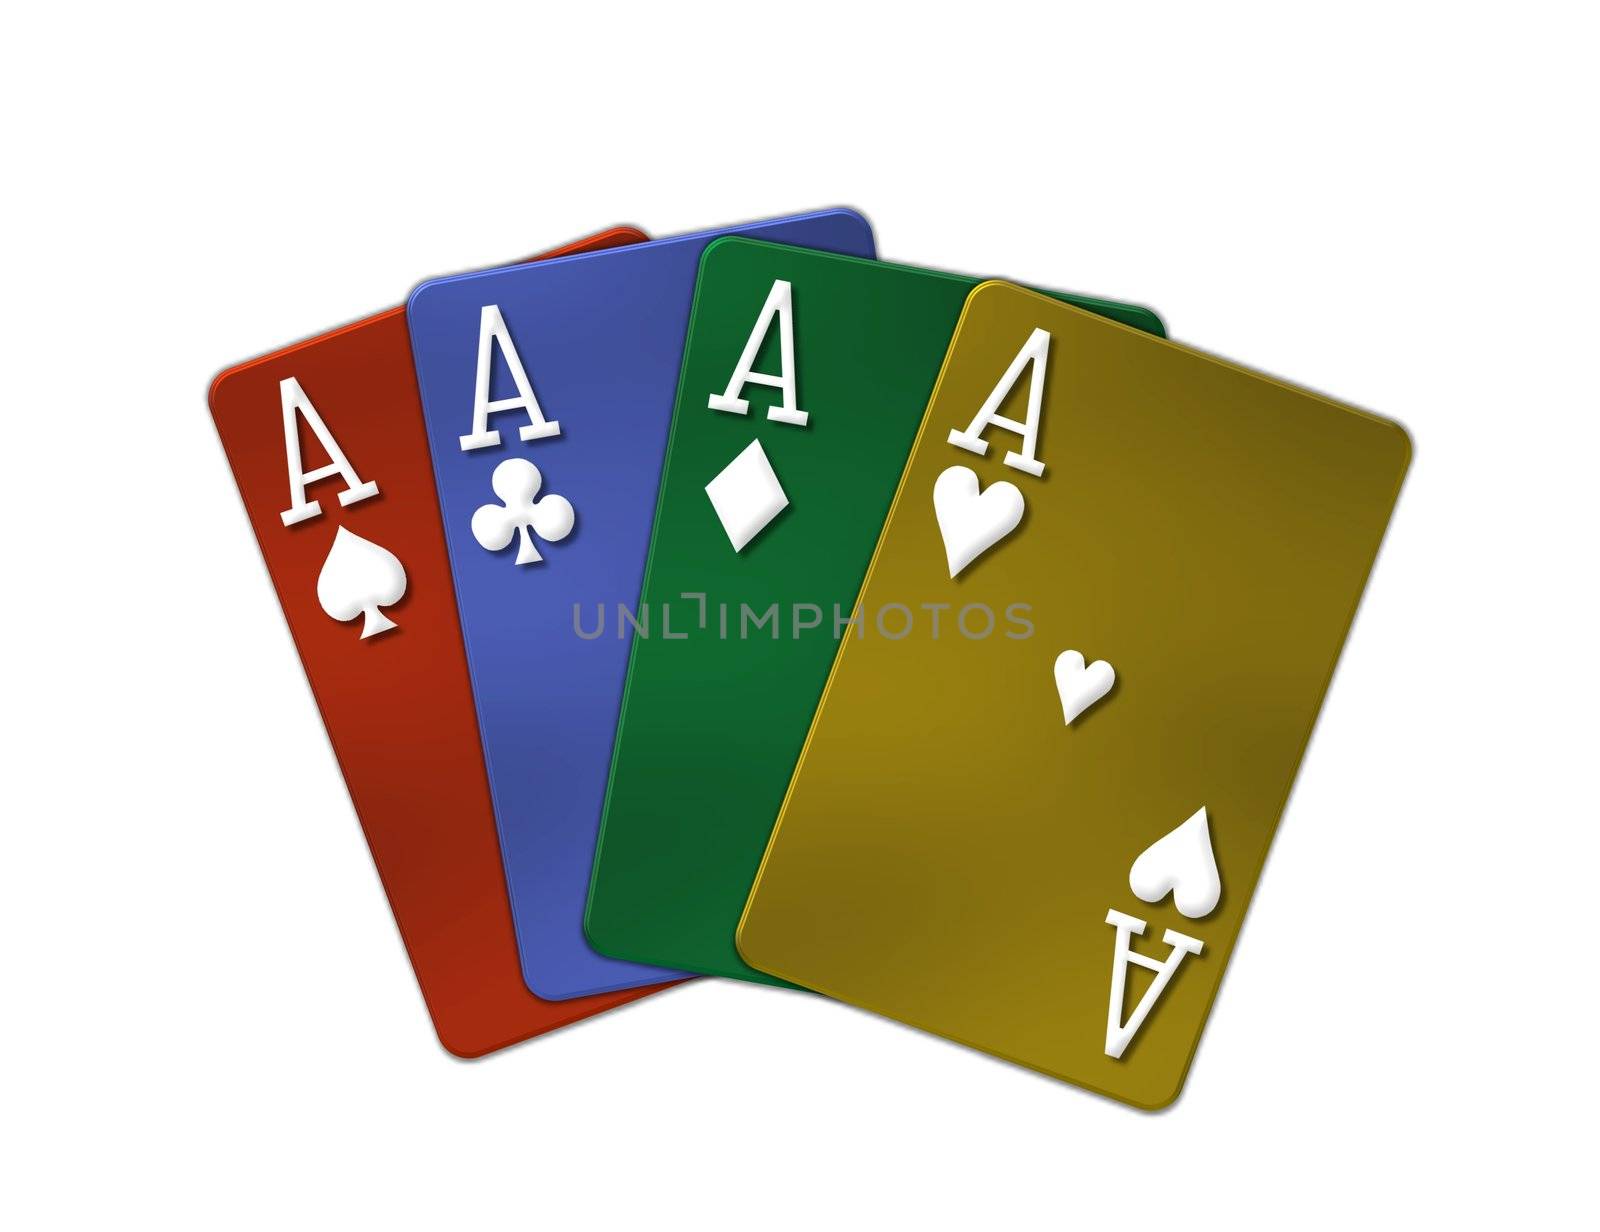 illustration of metallic poker cards - 4 of a kind aces by peromarketing